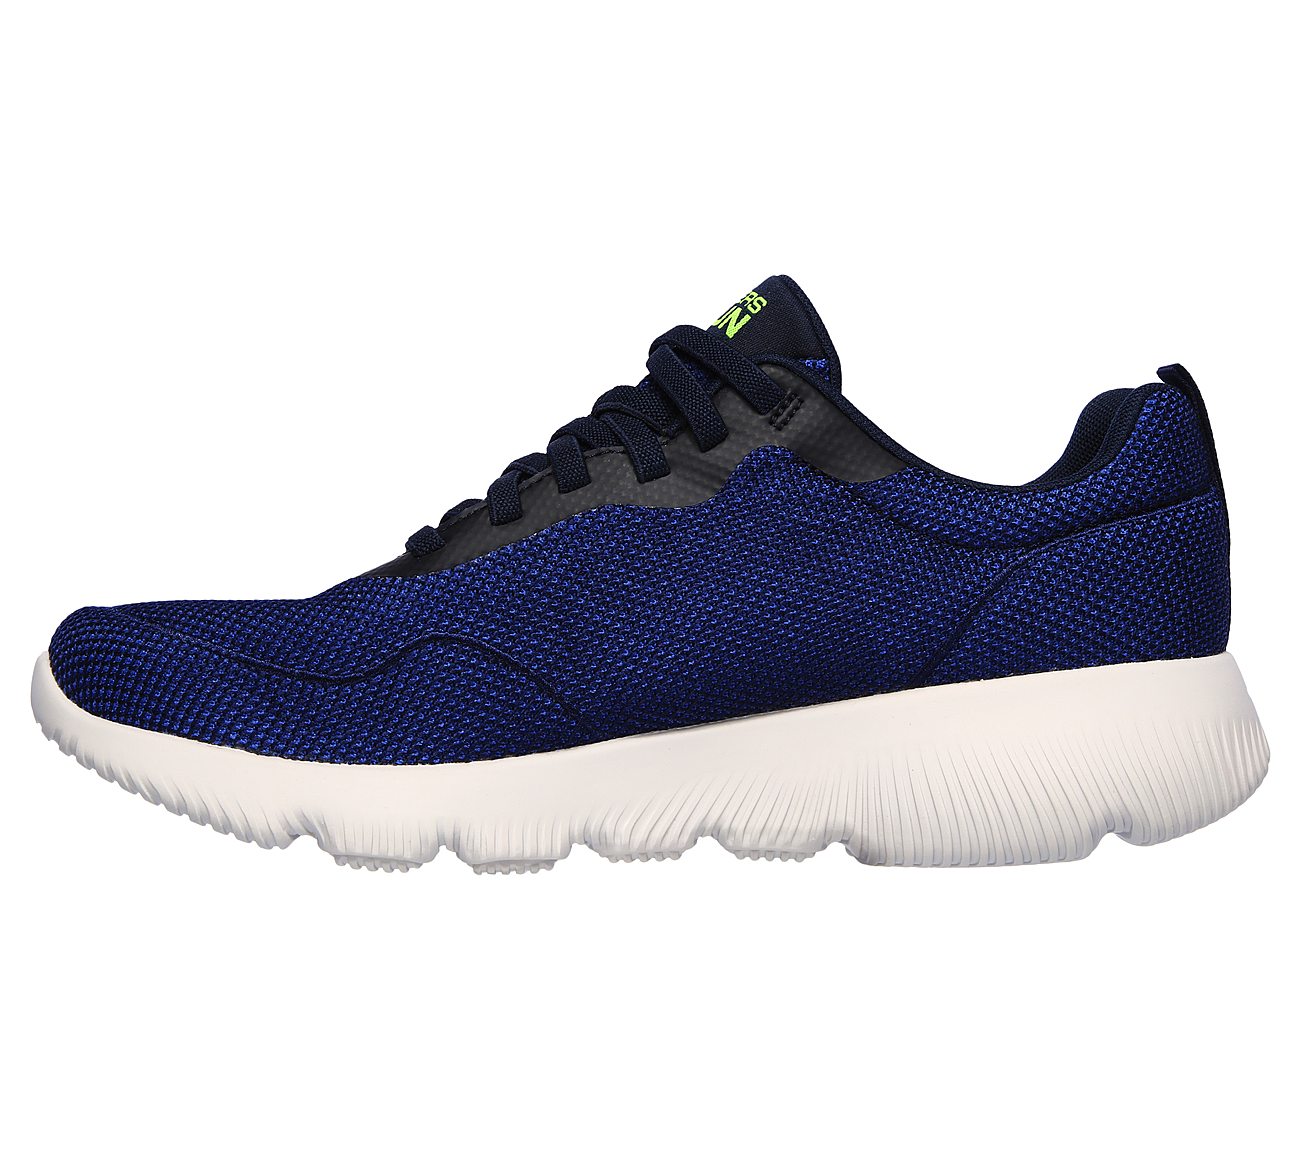 GO RUN FOCUS-FORGED, NAVY/GREEN Footwear Left View